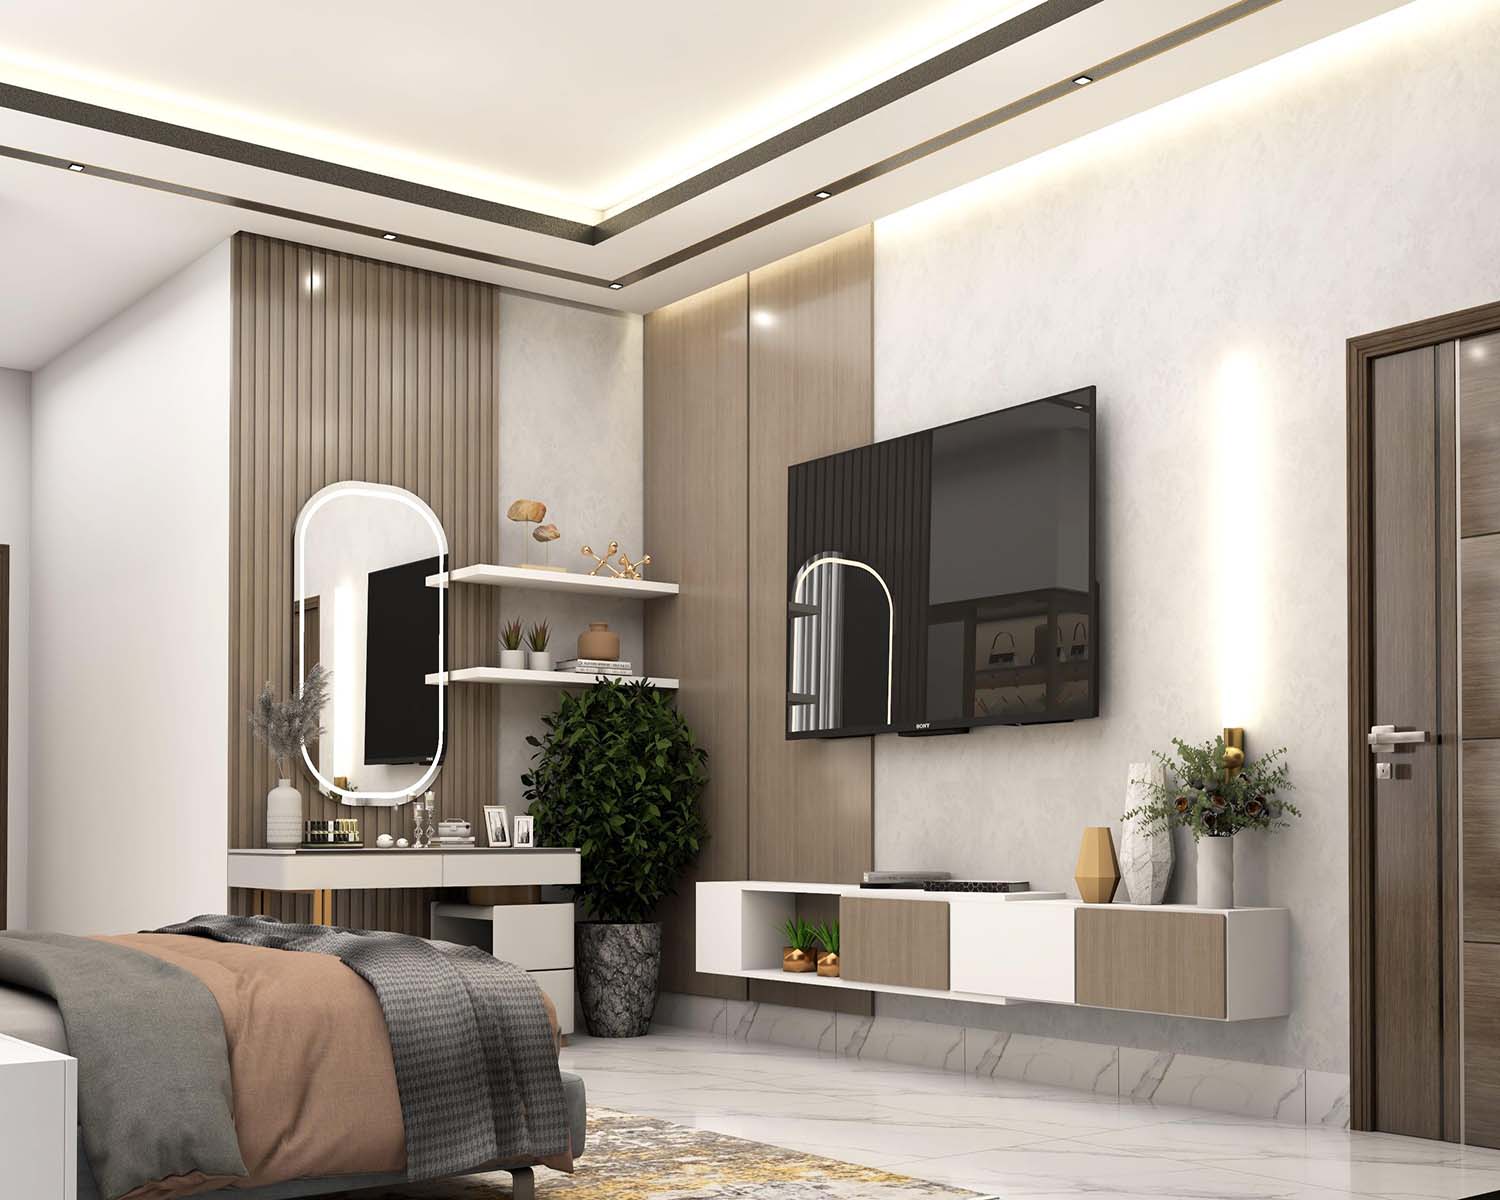 3d model of modern bedroom interior with a led tv hanging on the wall